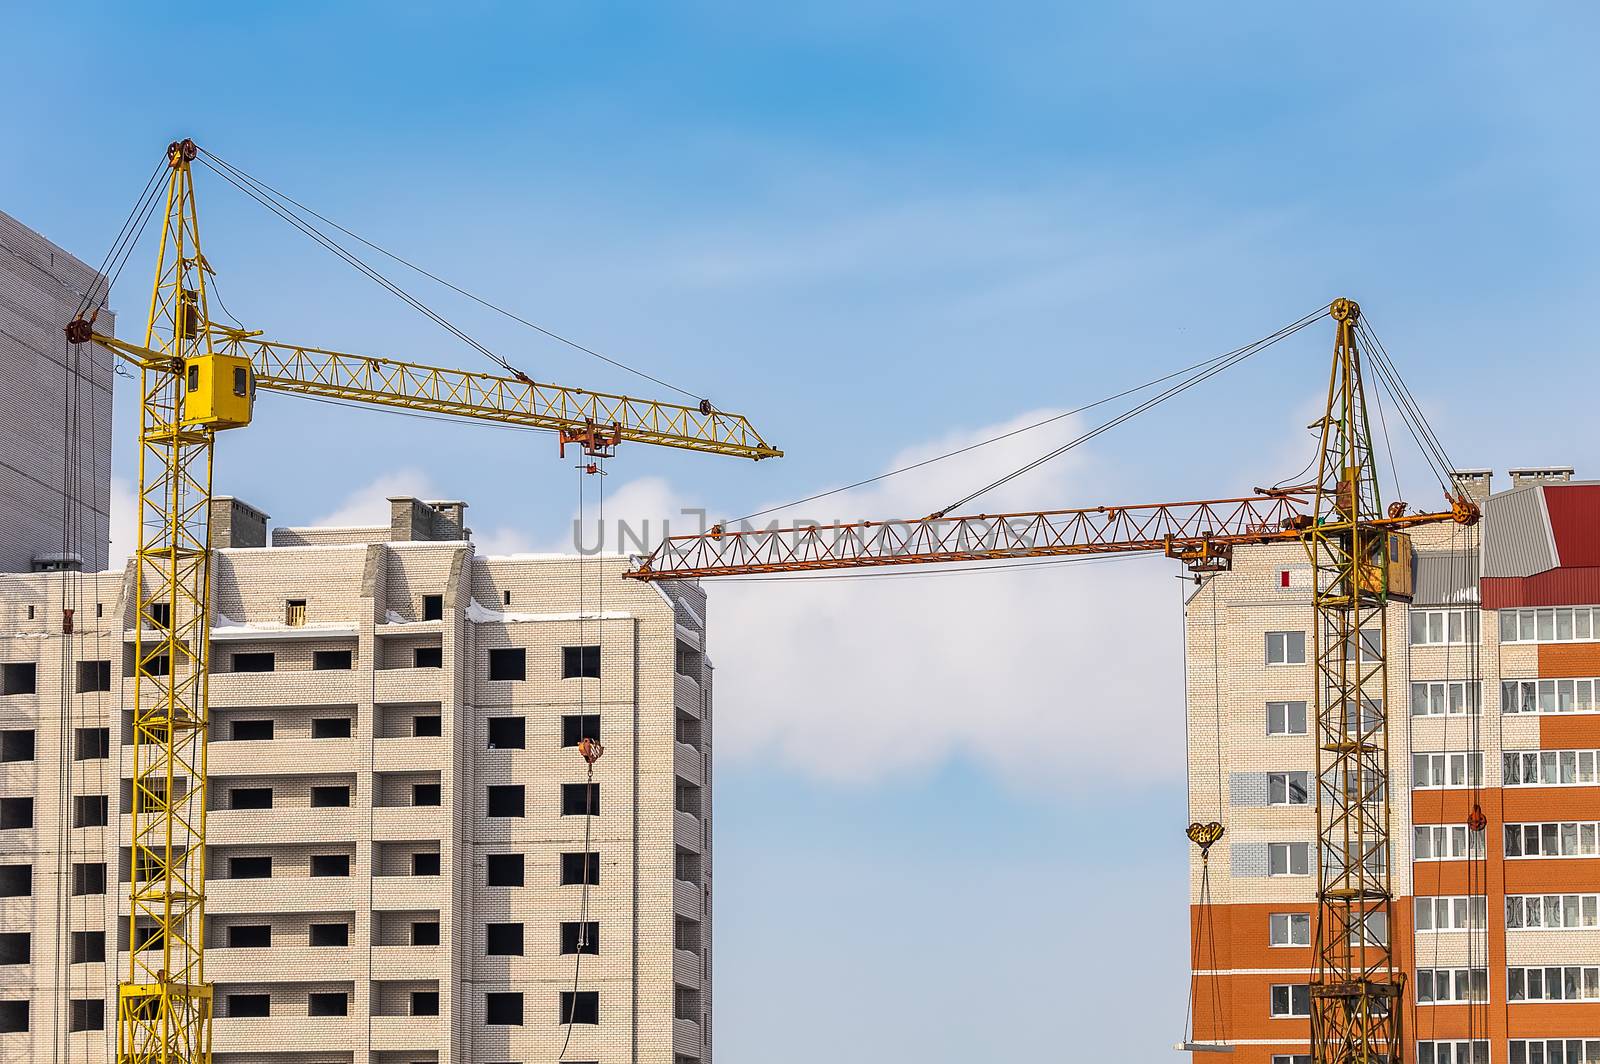 View of Construction Site with Two Apartment Buildings and Cranes. Blue Sky and Clouds Background